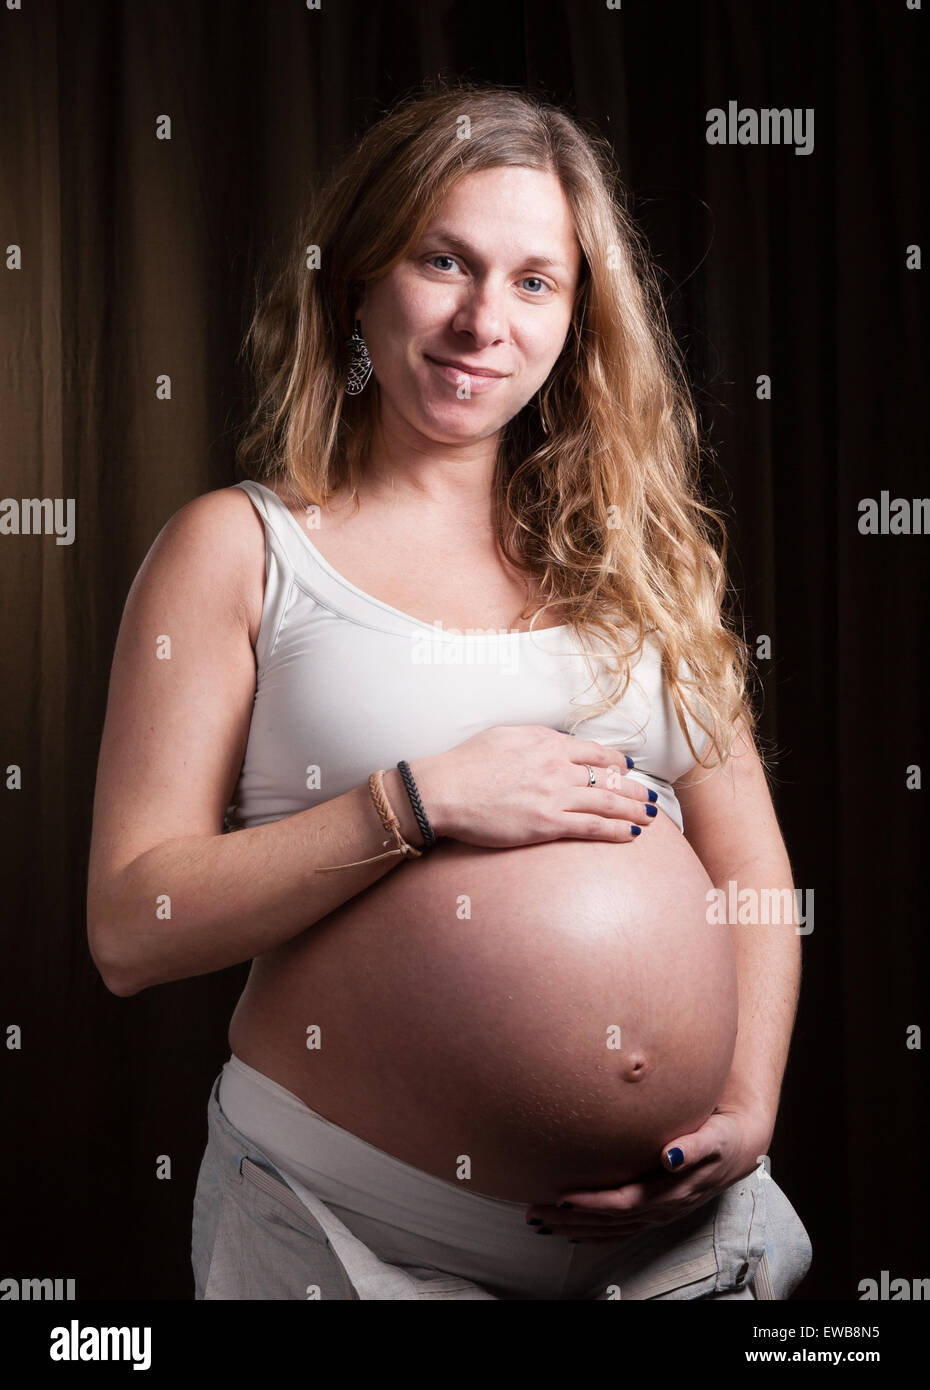 Blonde pregnant woman looking at camera in a studio portrait Stock Photo